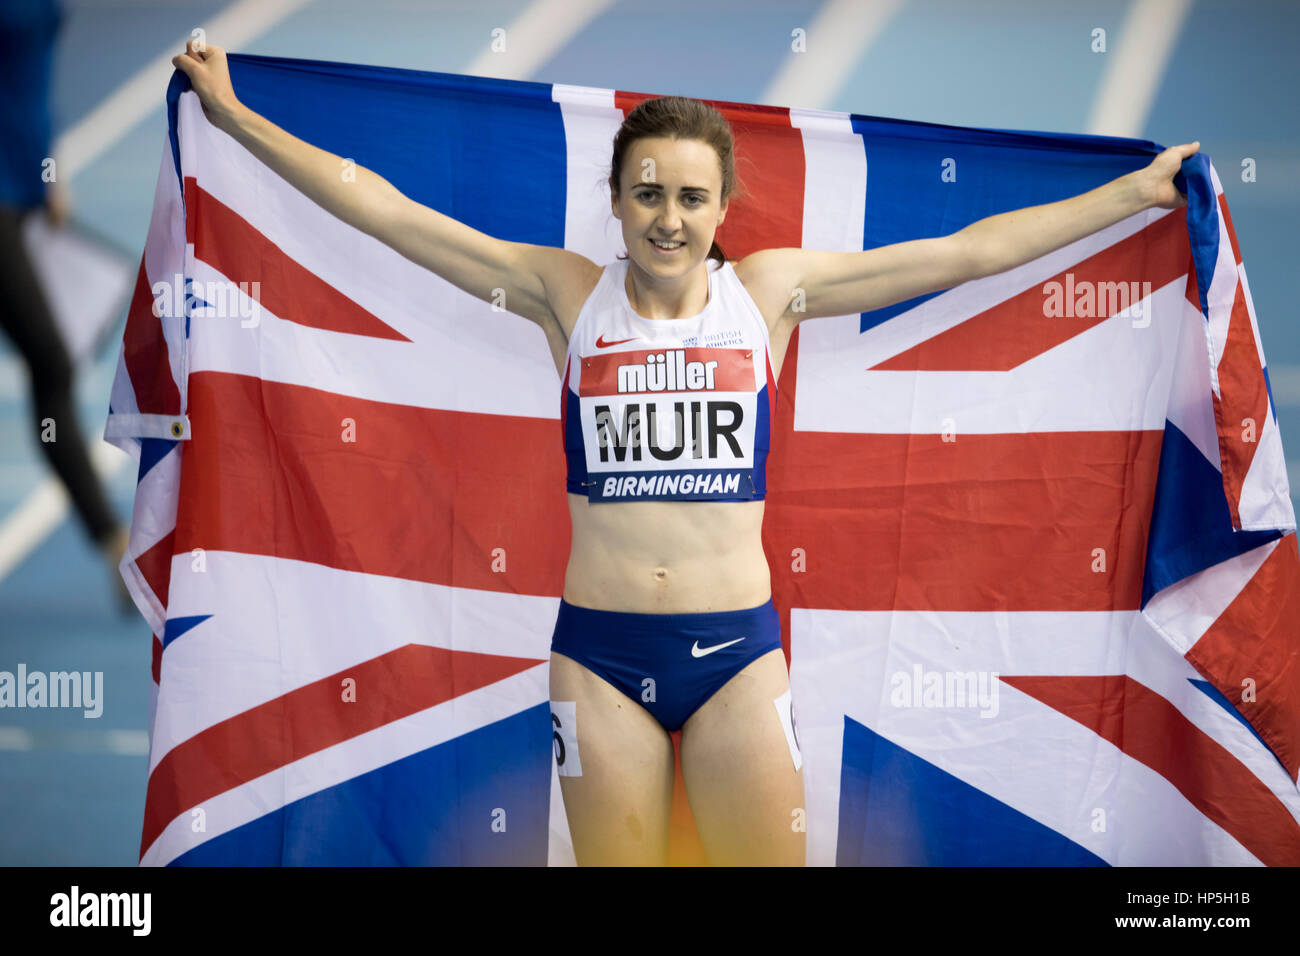 Birmingham, UK. 18th Feb, 2017. Laura Muir reacts after setting a new British record in the 1000m at the Muller Indoor Grand Prix Birmingham at the NIA, Birmingham, UK, on 18 February 2017. Credit: Andrew Peat/Alamy Live News Stock Photo